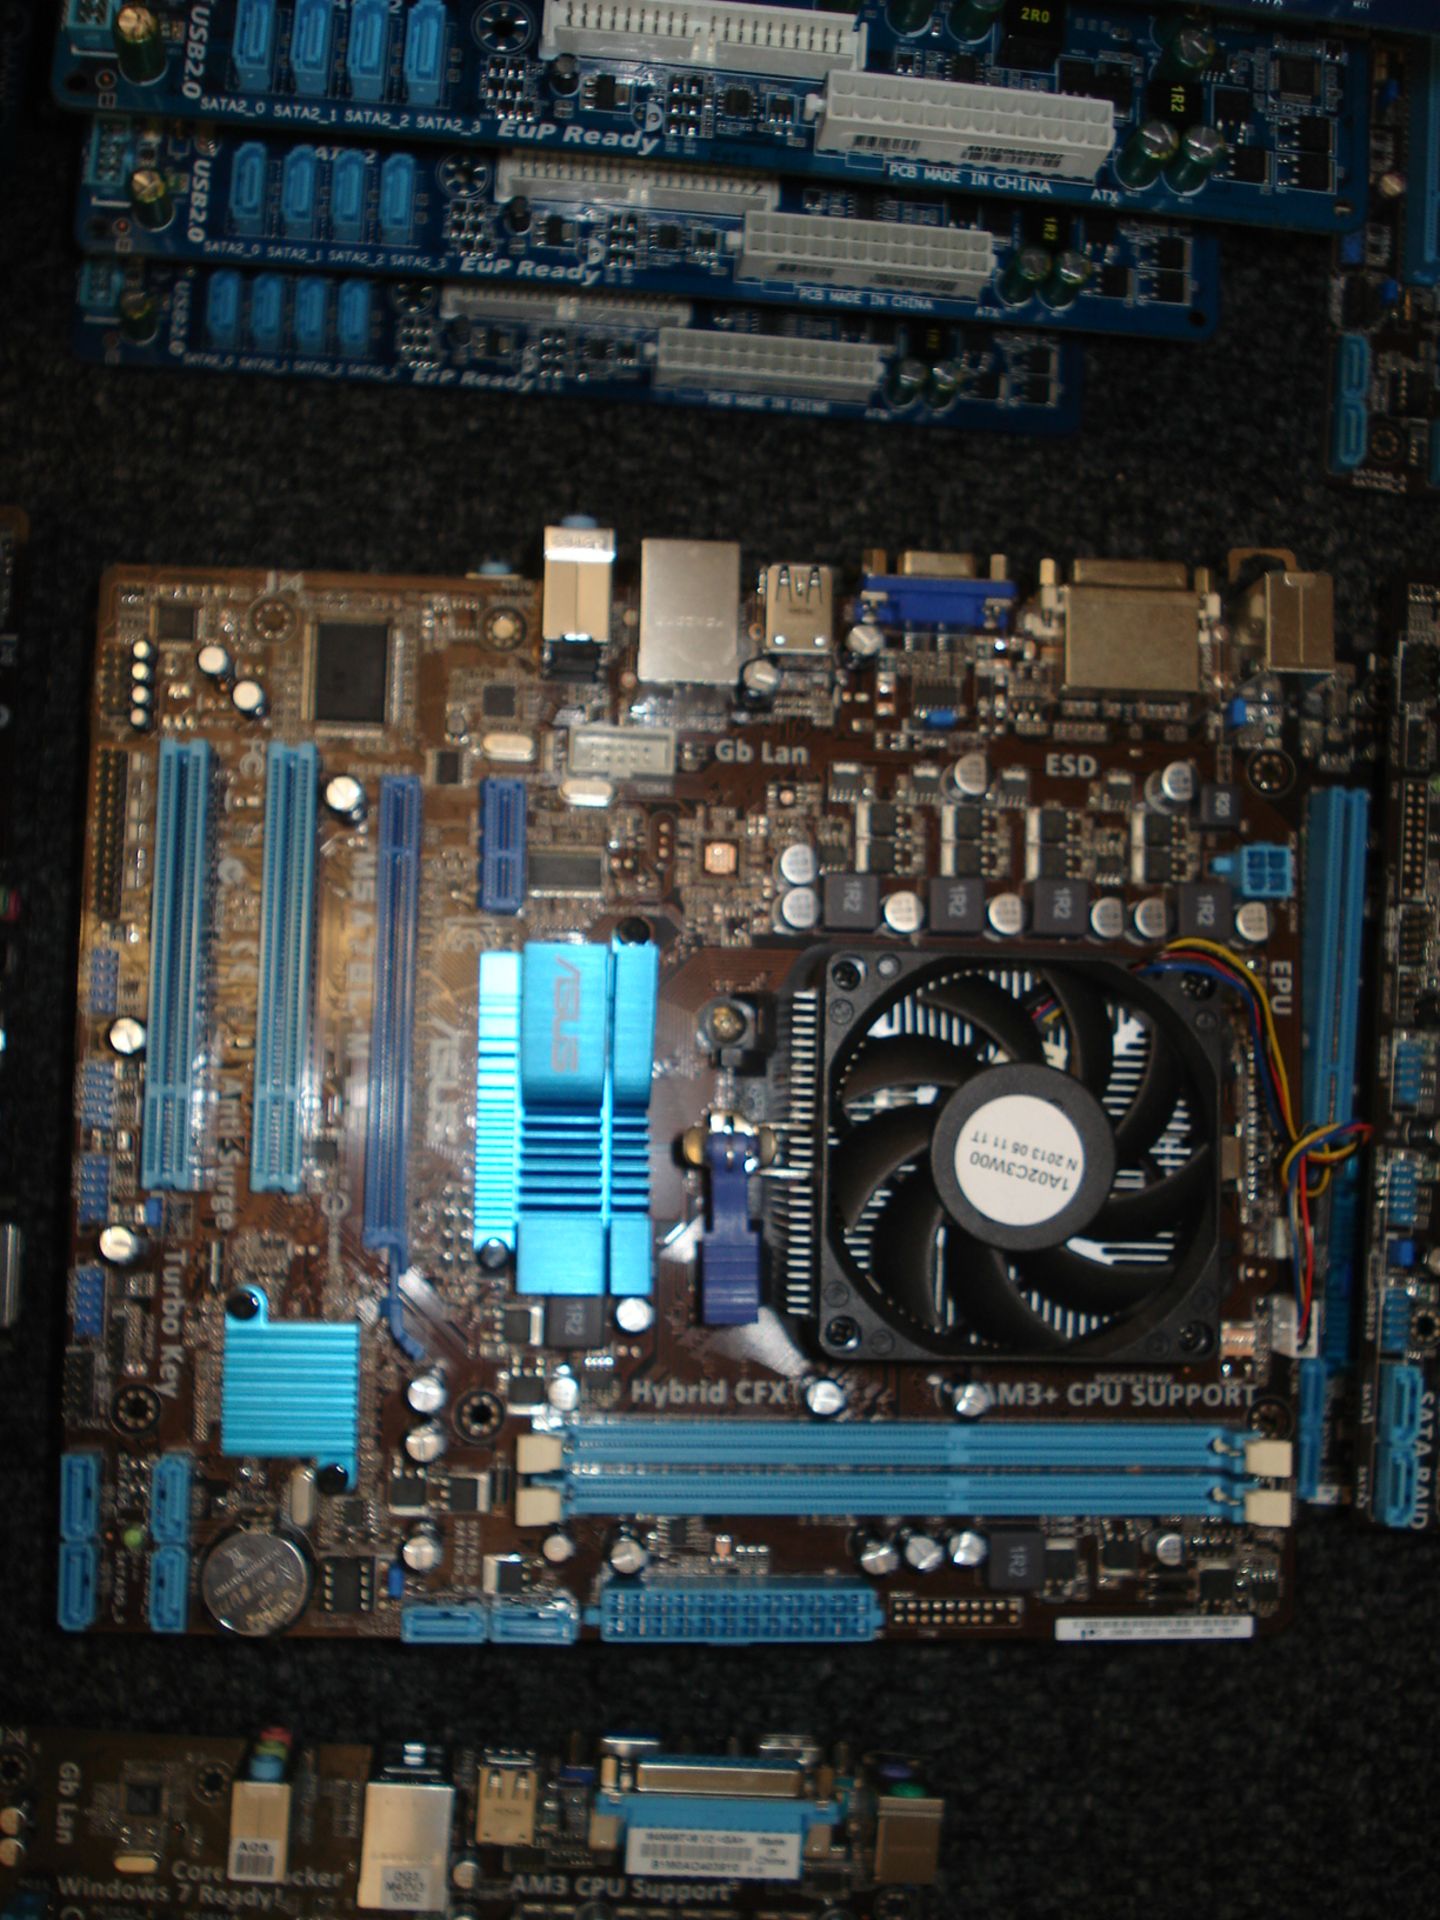 ASUS Boards - M4N68T-M LE V2 - QTY 2, M4N68T-M V2 - QTY 1, M5A7BL-M LE QTY 2, AM3 + CPU SUPPORT - - Image 9 of 12